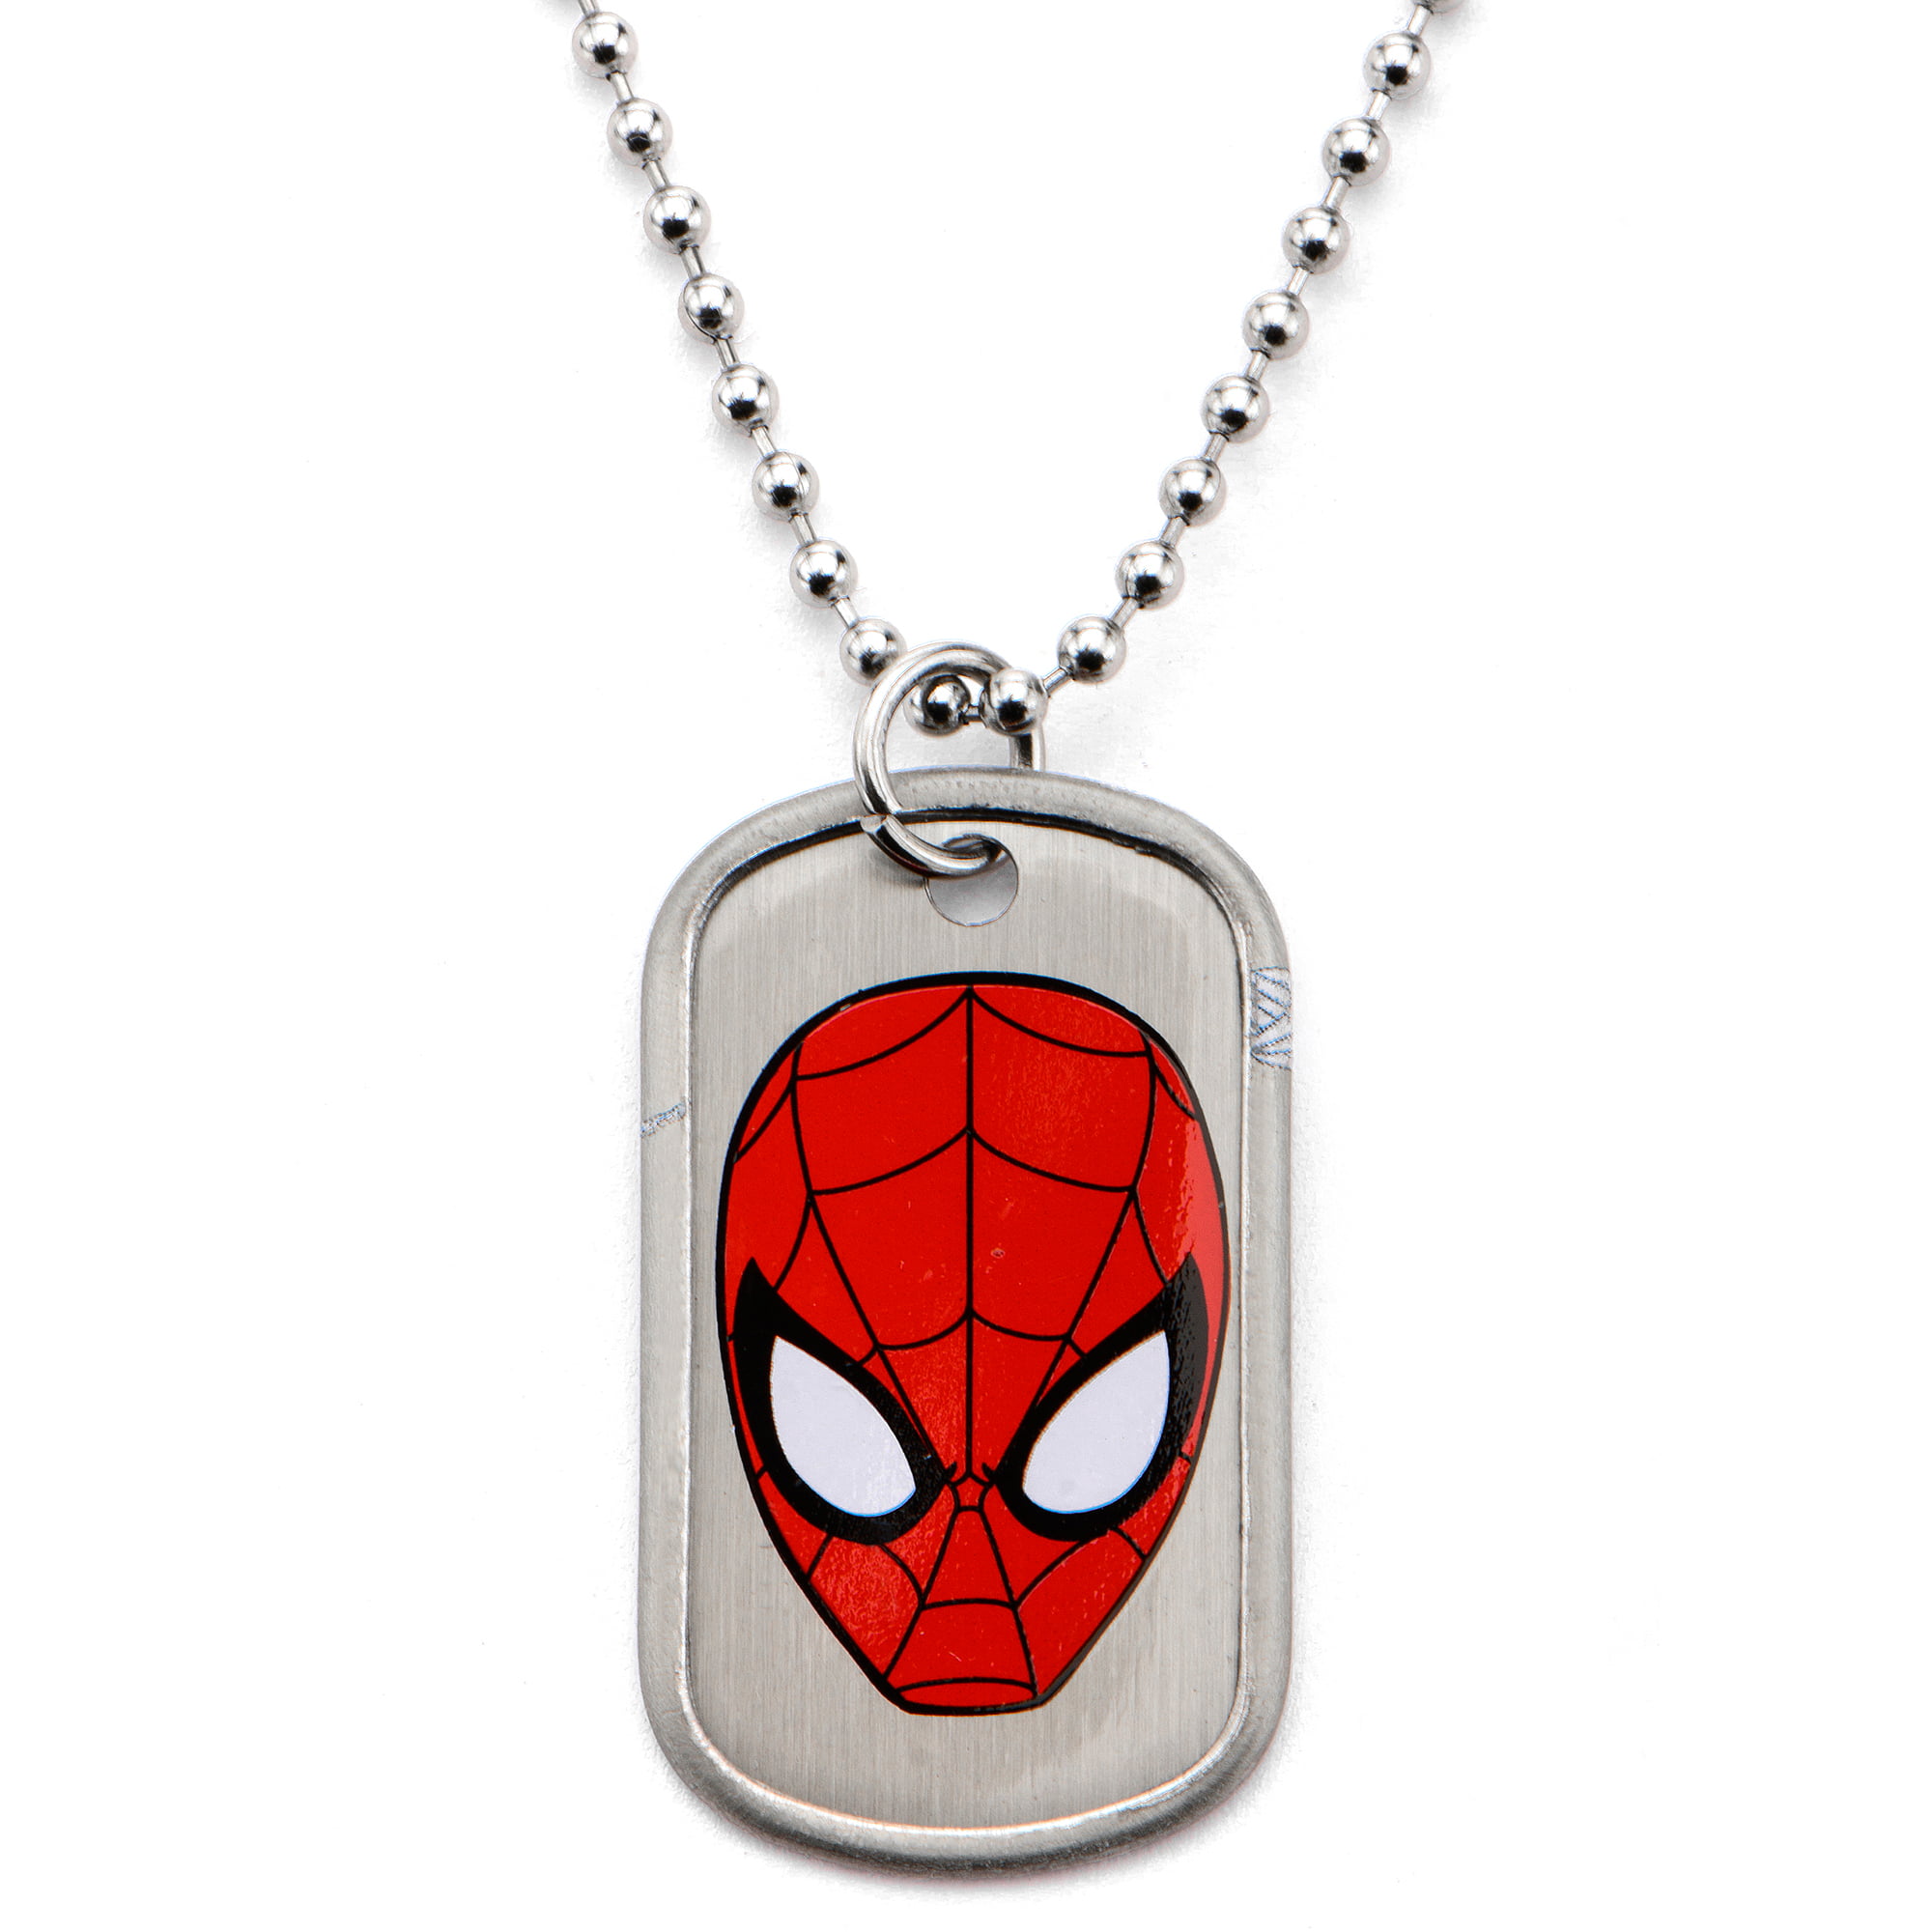 Spider-Man Game Custom Photo Dog Tag Jewelry Necklaces Pendant Chain